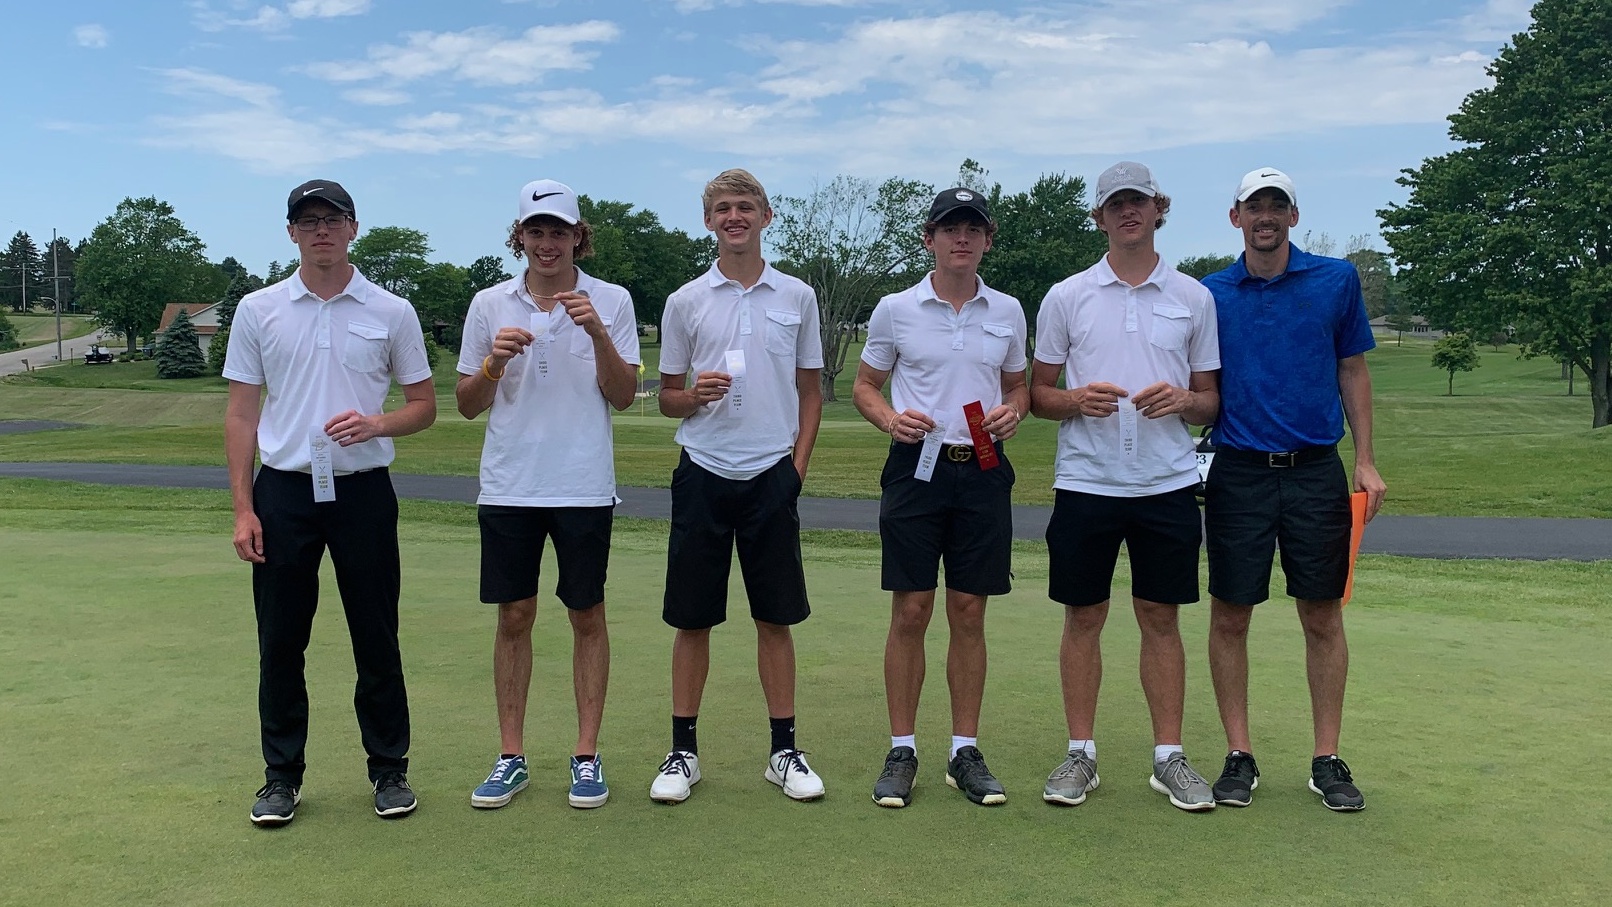 Triton Golf Takes 3rd at Sectional, Qualifies for Regional